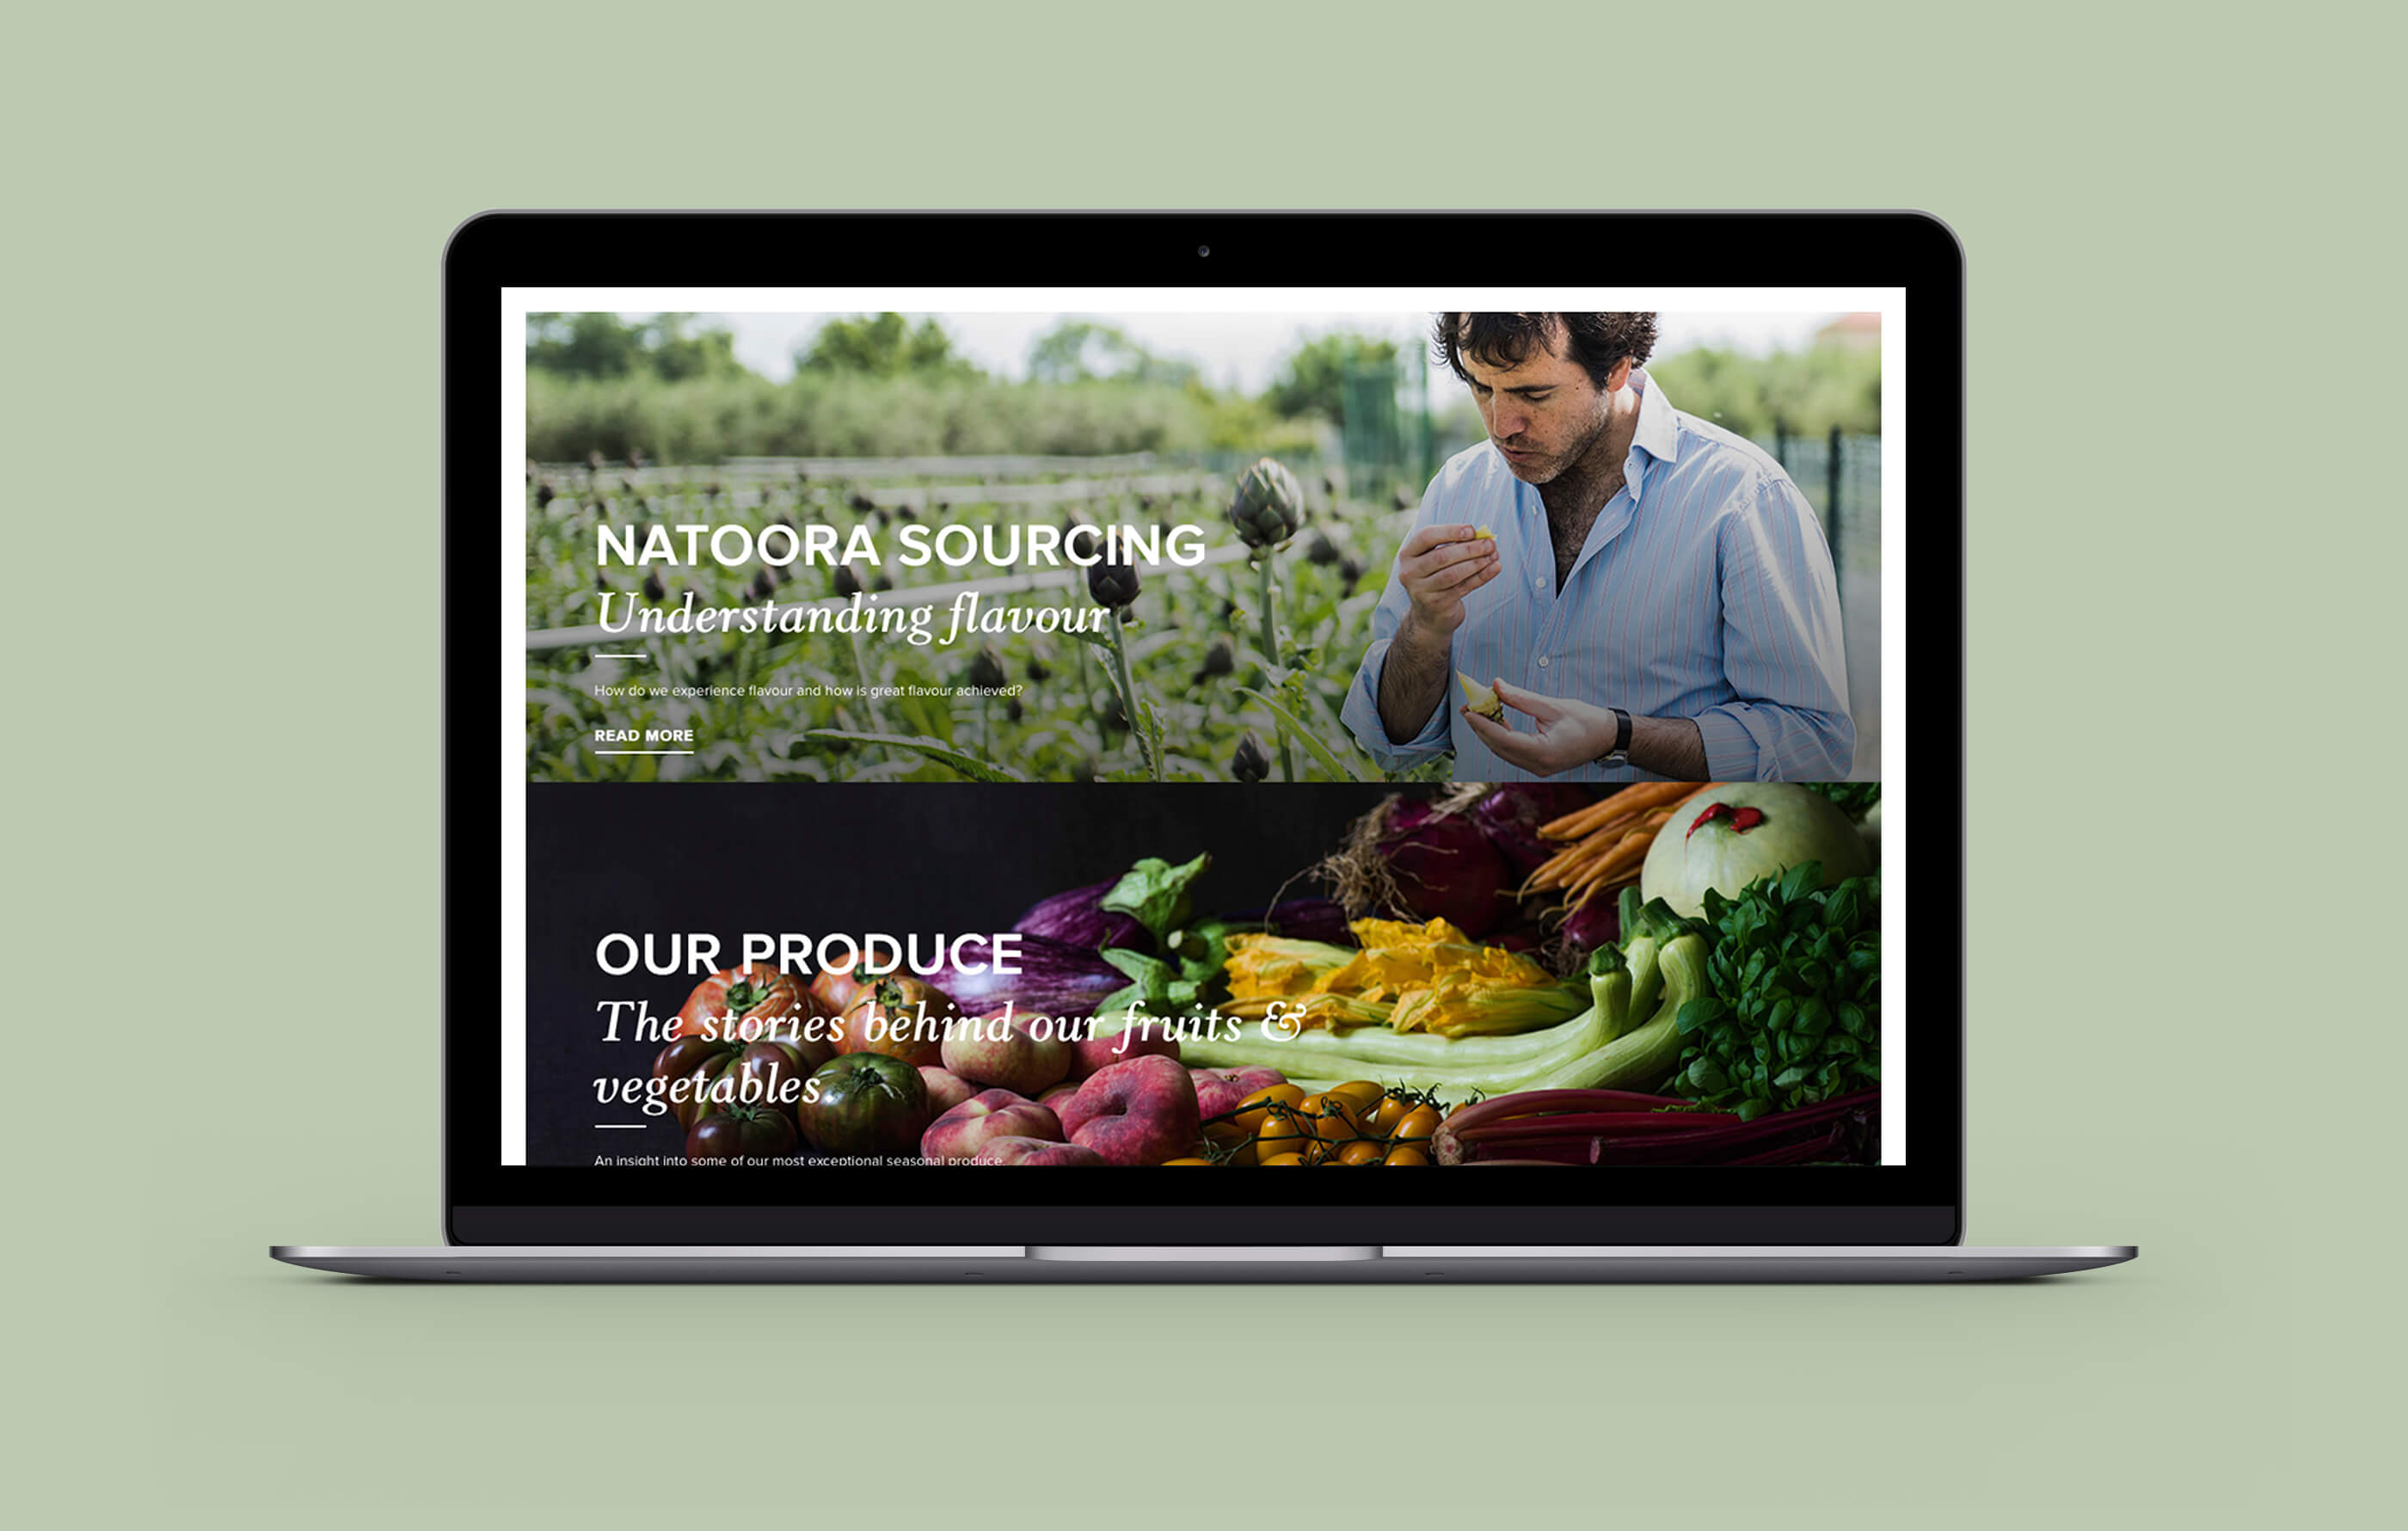 'Natoora Sourcing' and Our Produce' website banners, on a pastel green background